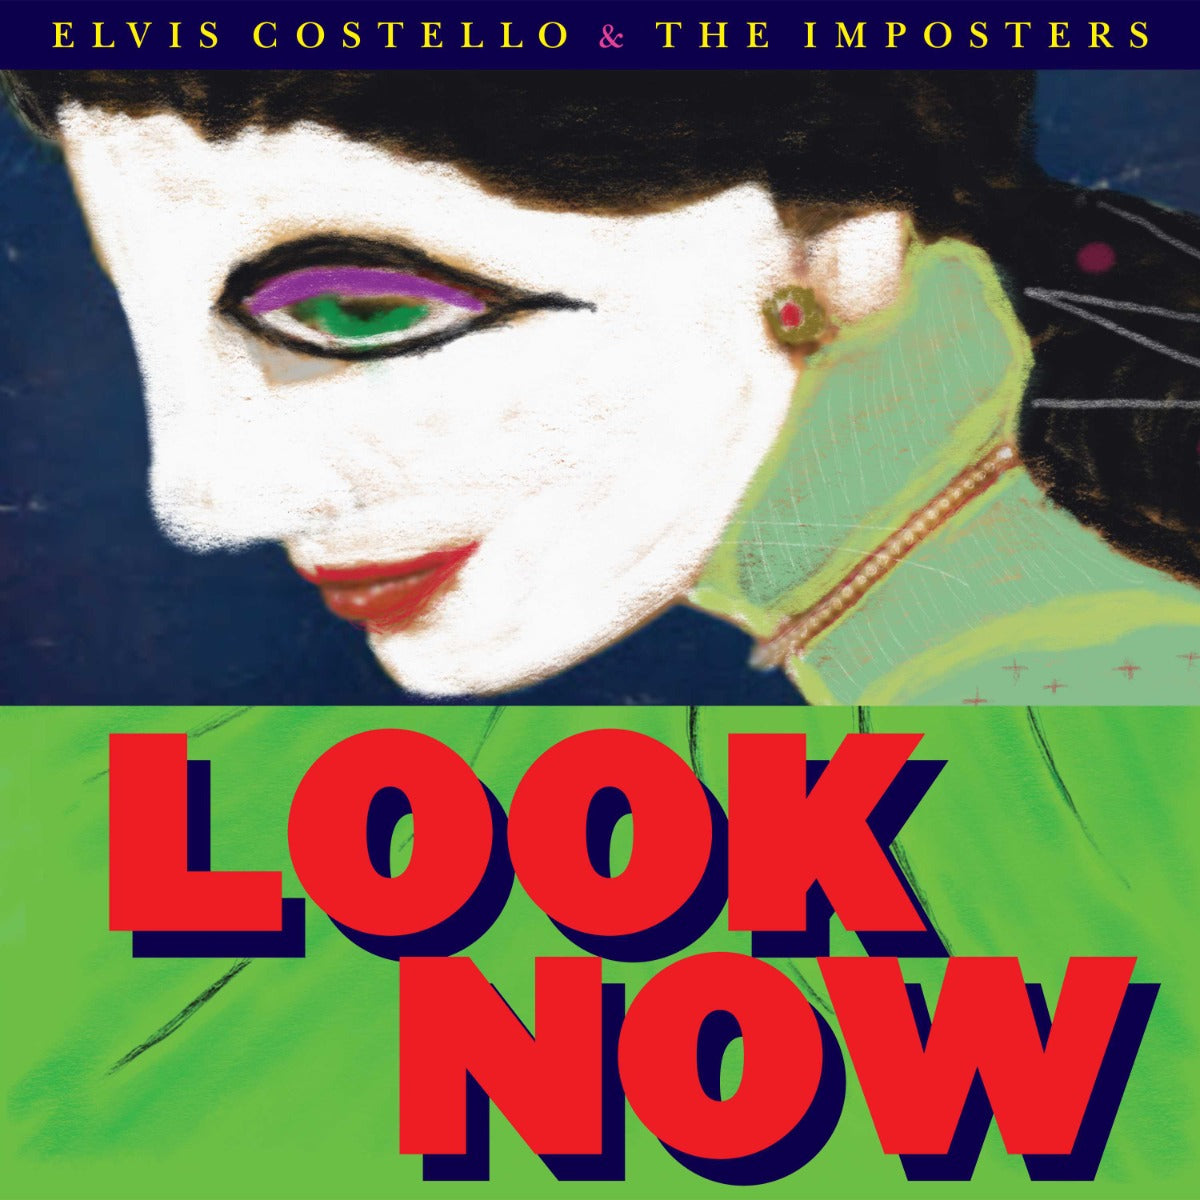 Elvis Costello & The Imposters Look Now (Deluxe Edition, Limited Edition, Colored Vinyl, Red) (2 Lp's) | Vinyl